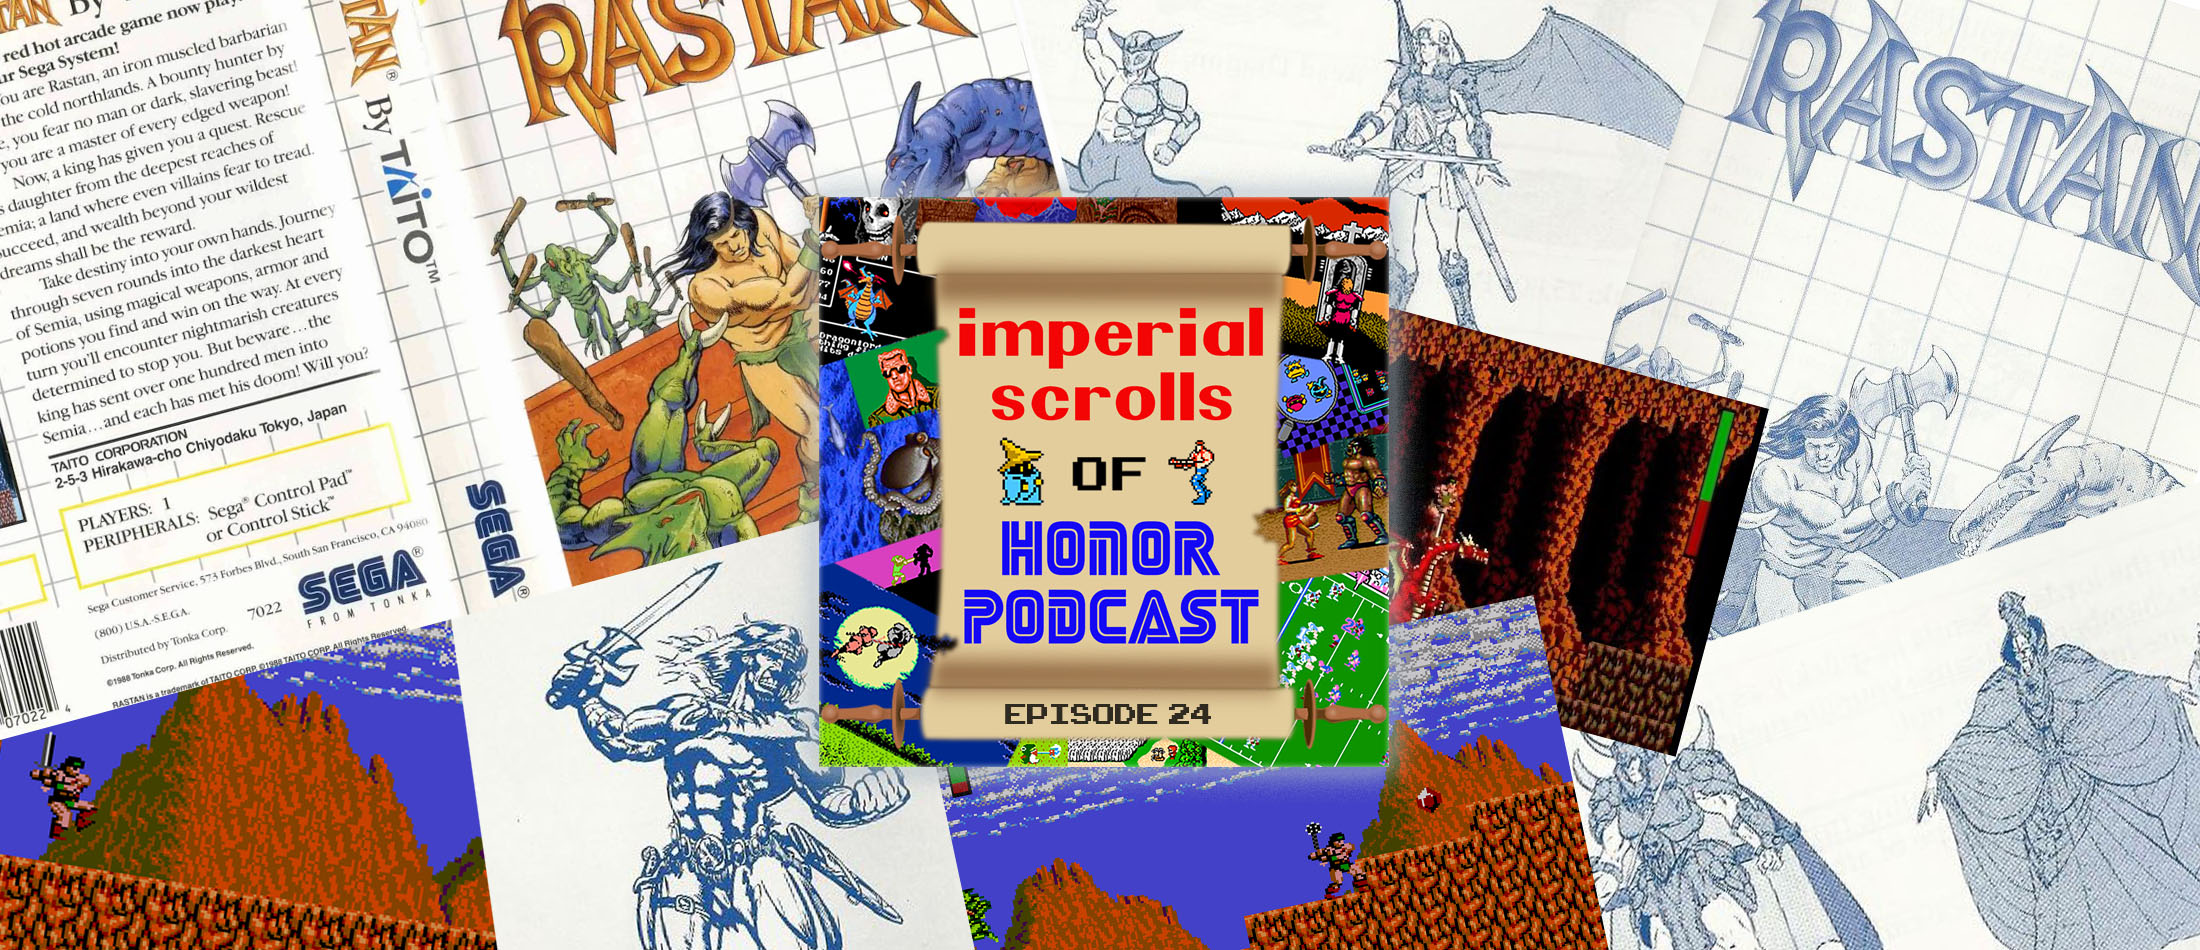 Imperial Scrolls of Honor Podcast - Episode 24 - Rastan (SMS)